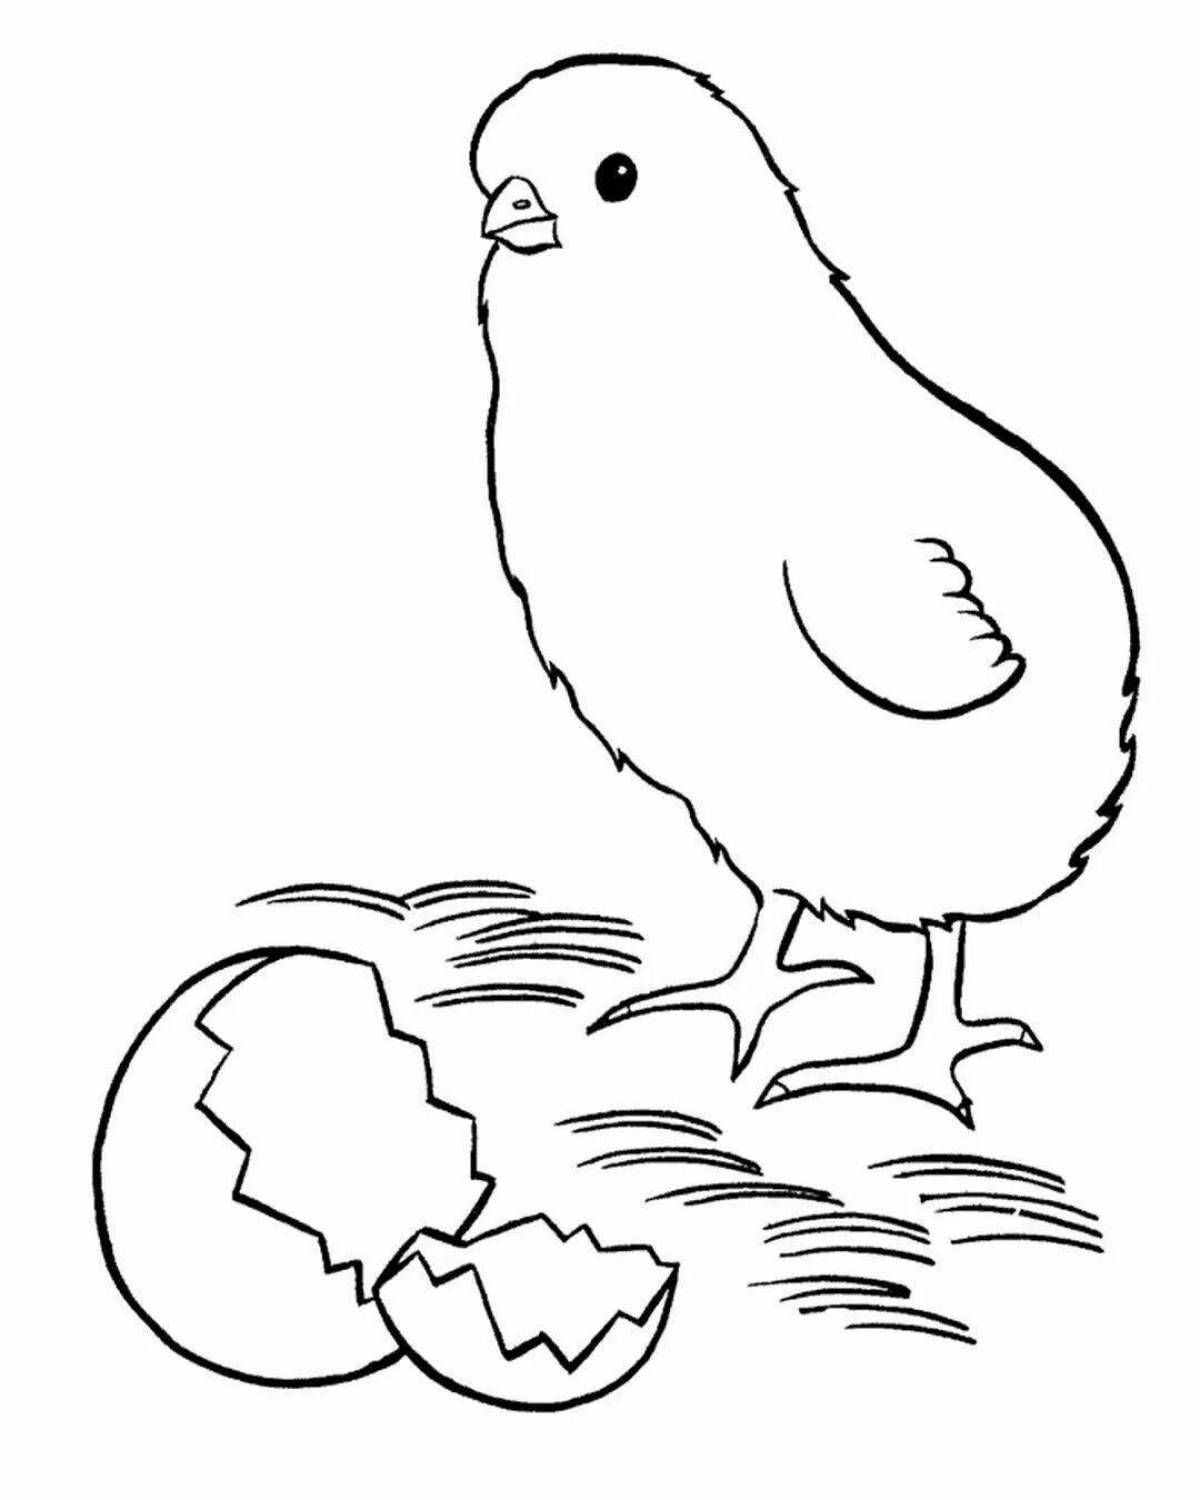 Cute chick drawing